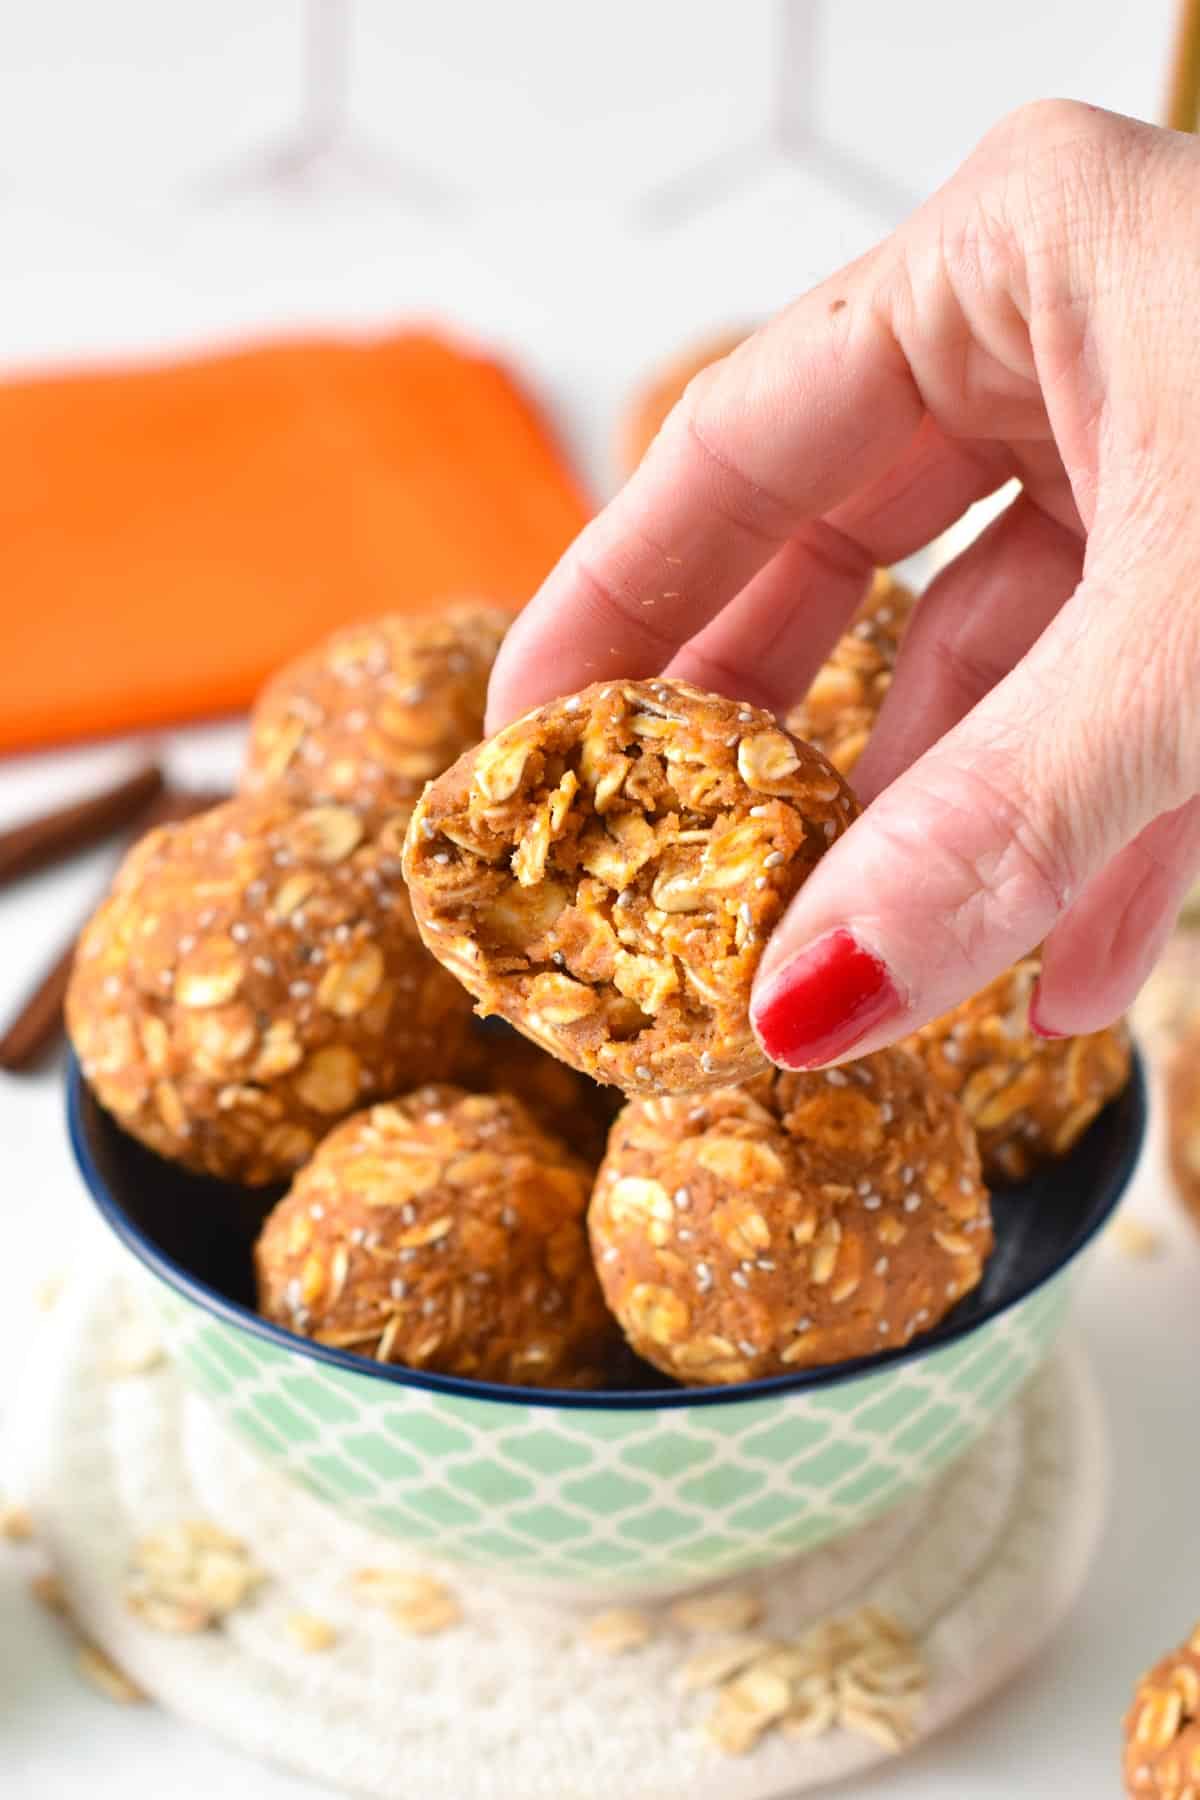 These Pumpkin Protein Balls are easy, healthy energy balls flavored with pumpkin pie spices and packed with proteins from plant-based protein powder.